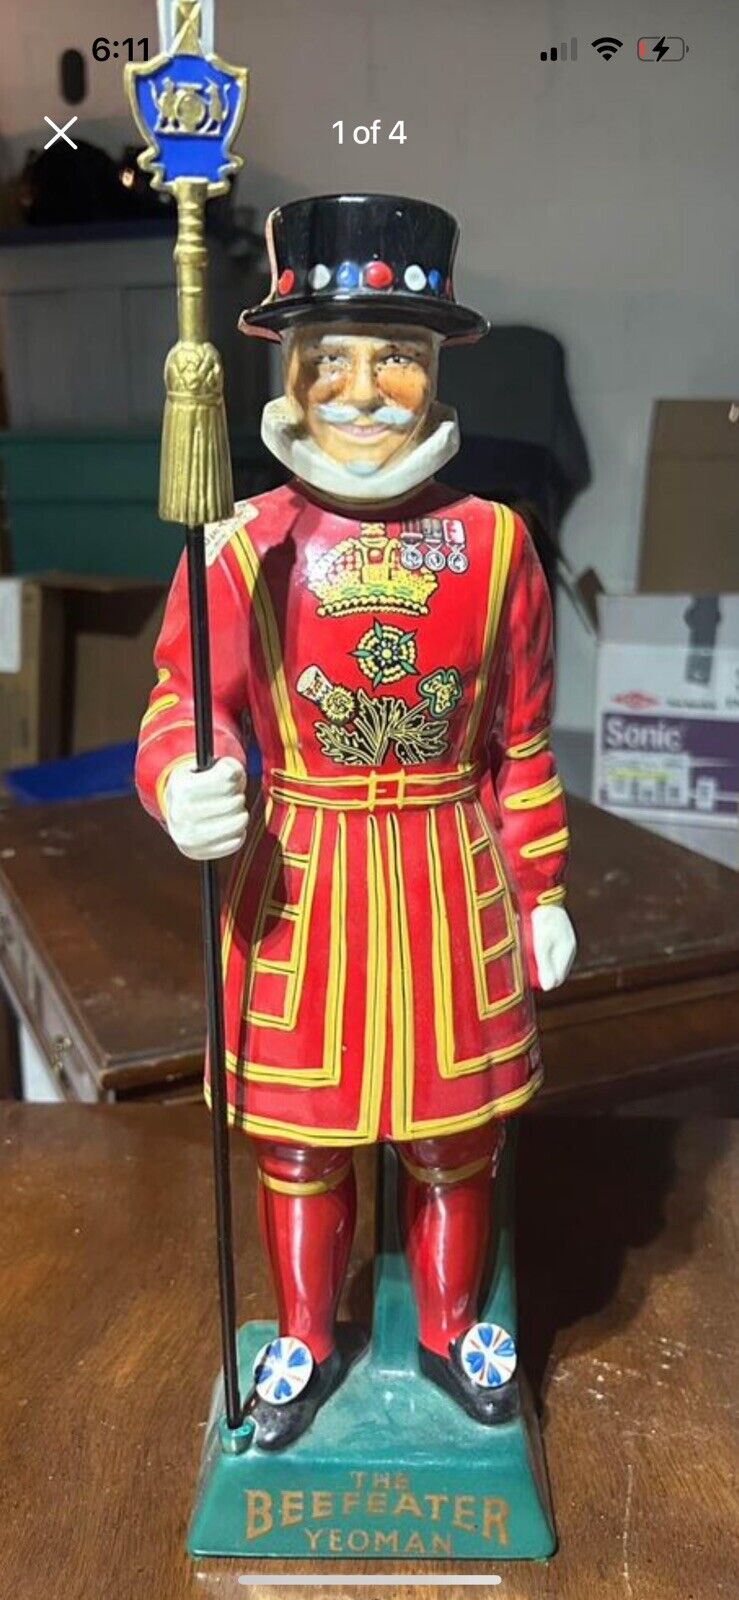 Vintage 1960s The Beefeater Yeoman Gin Ceramic Decanter Bottle 